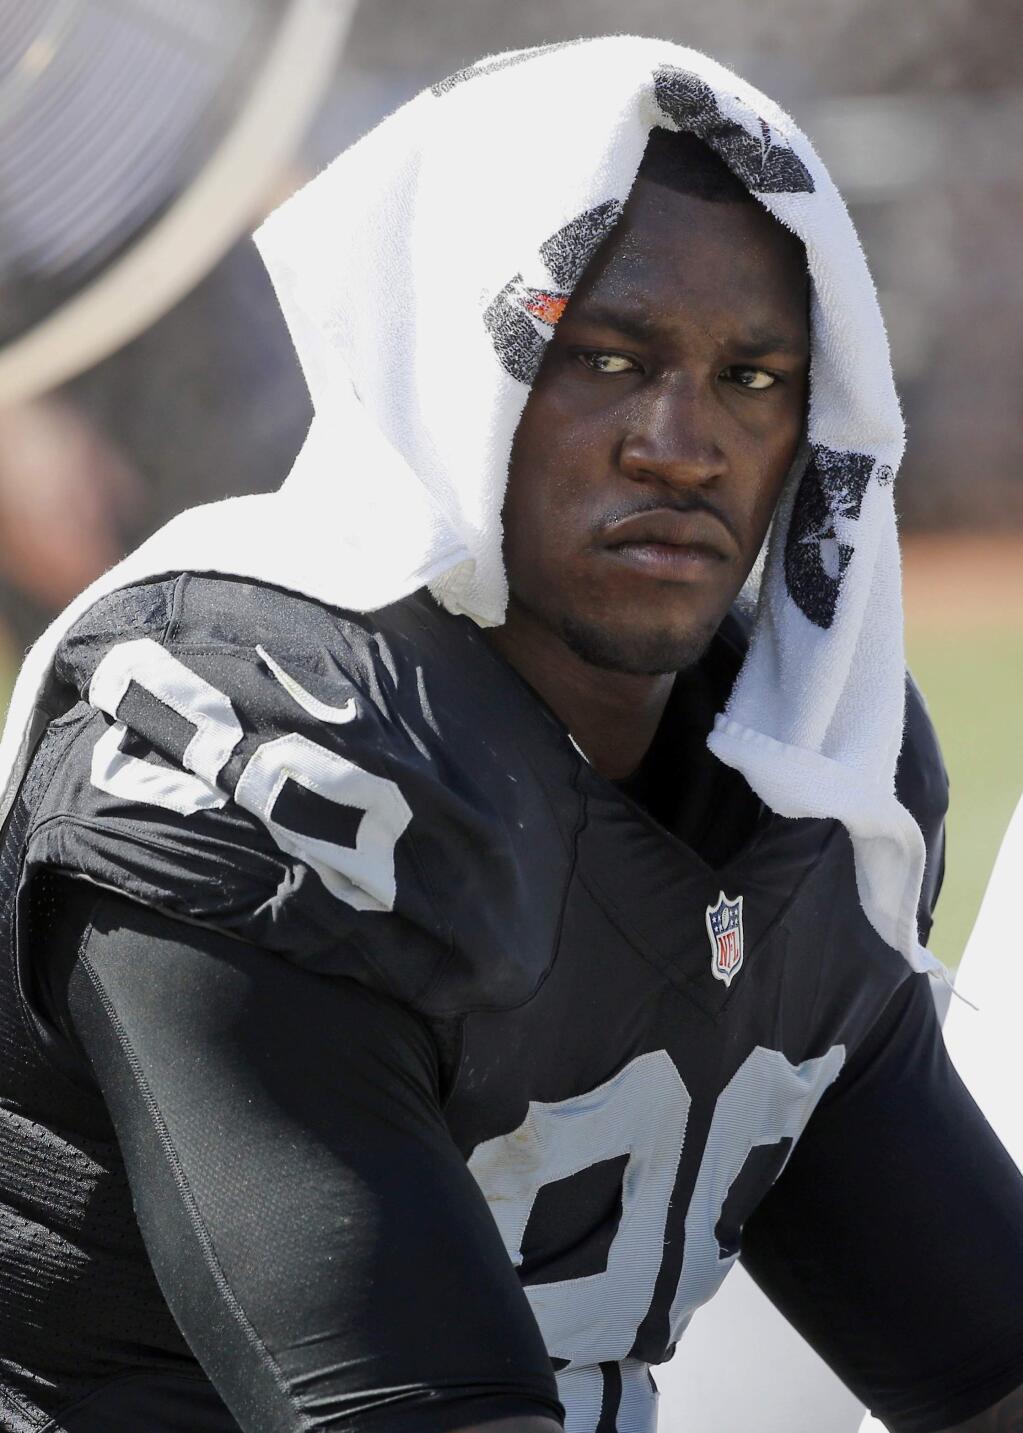 FILE - In this Sept. 20, 2015, file photo, Oakland Raiders' Aldon Smith cools off during an NFL football game against the Baltimore Ravens in Oakland , Calif. The former Raiders player turned himself into police on Tuesday, March 6, 2018, and was booked into San Francisco County Jail on suspicion of misdemeanor domestic violence and three related misdemeanors. (AP Photo/Tony Avelar, File)